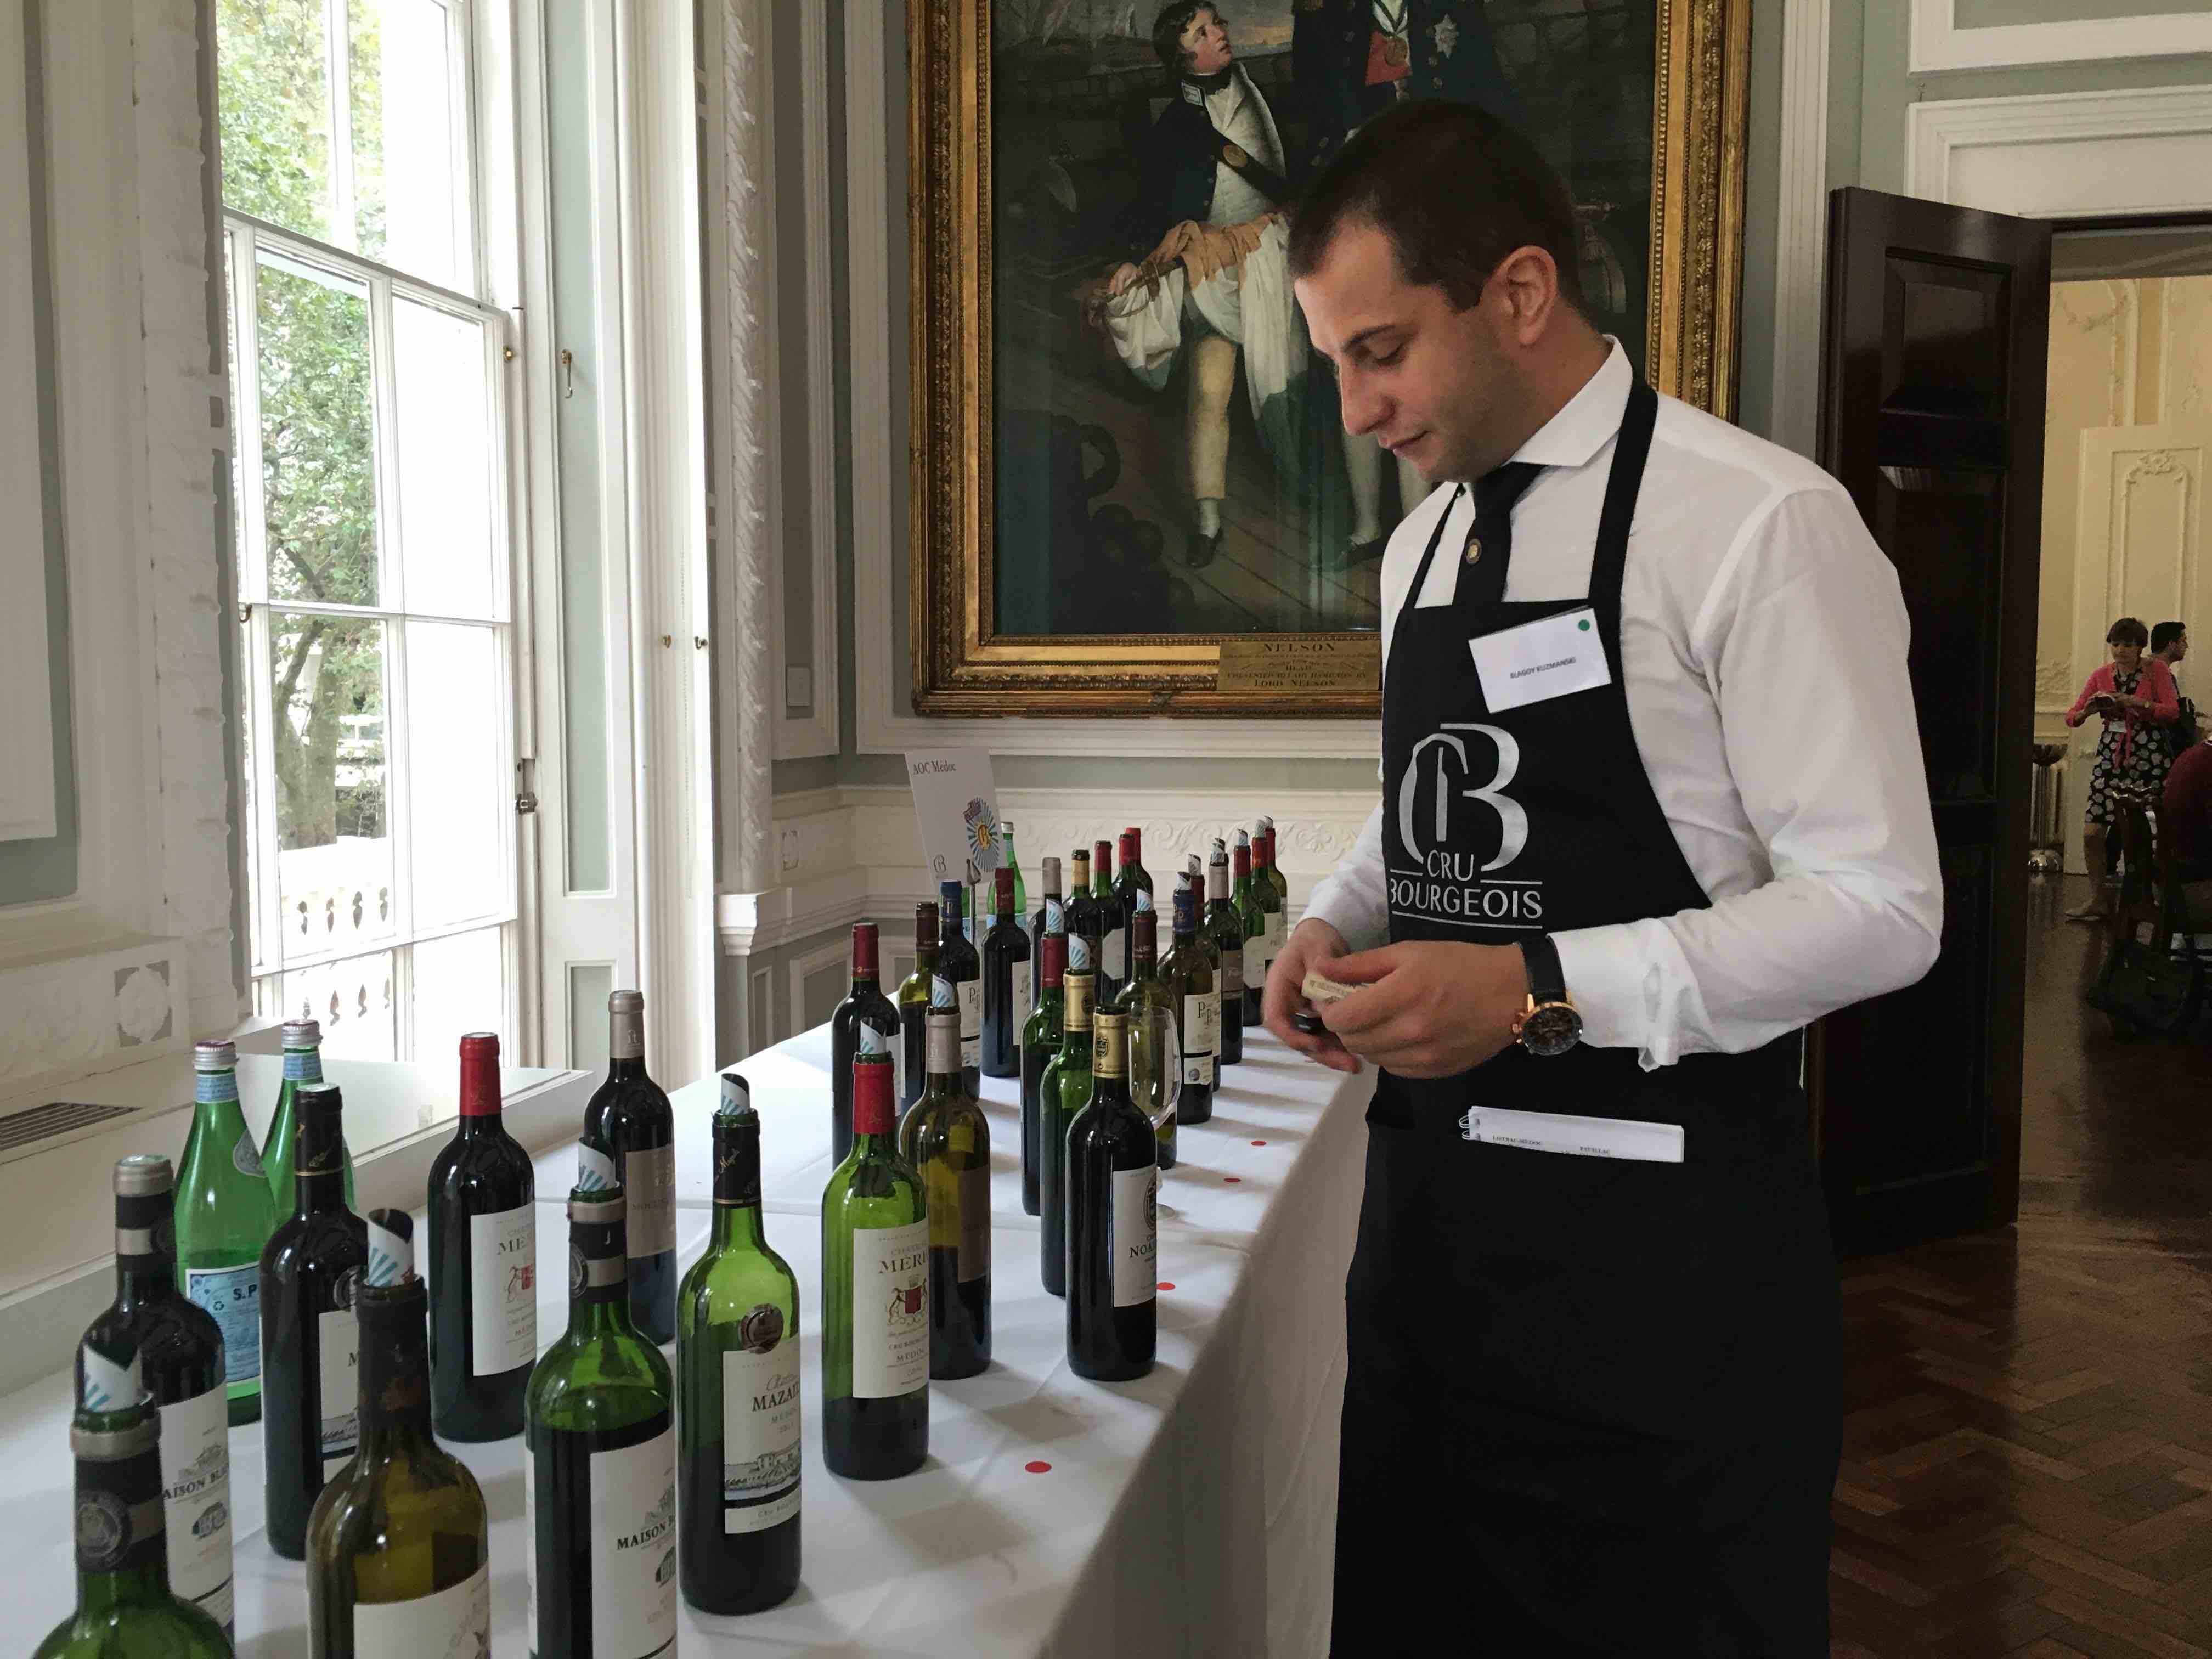 2014 Crus Bourgeois: great early-drinking wines at affordable prices